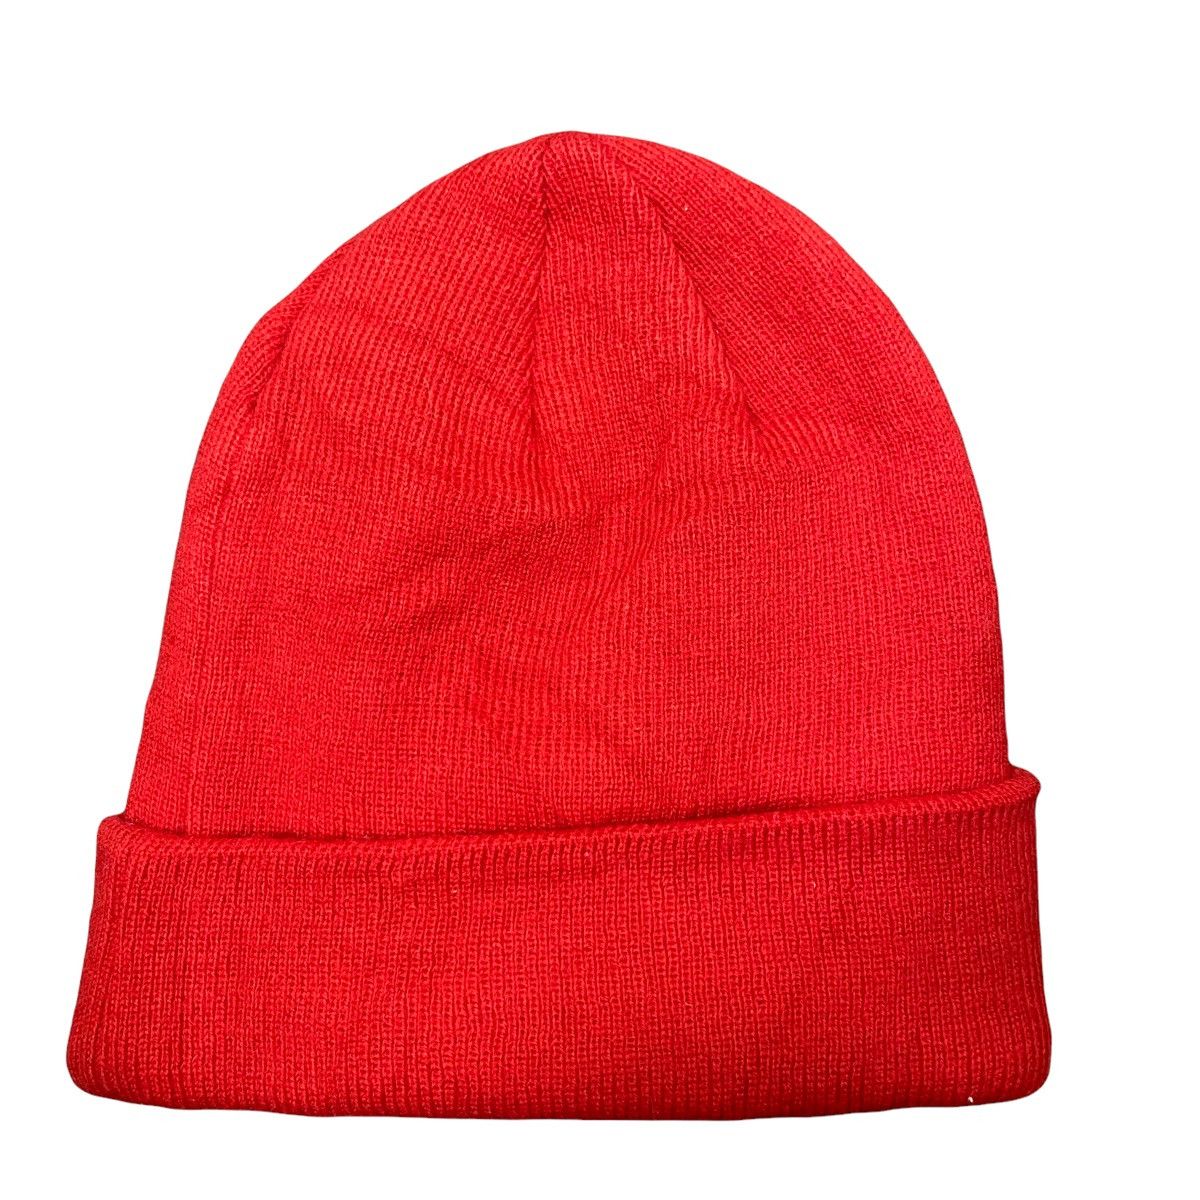 Vintage 90s Nike Embroidery Beanie Unisex Red Colour - 6